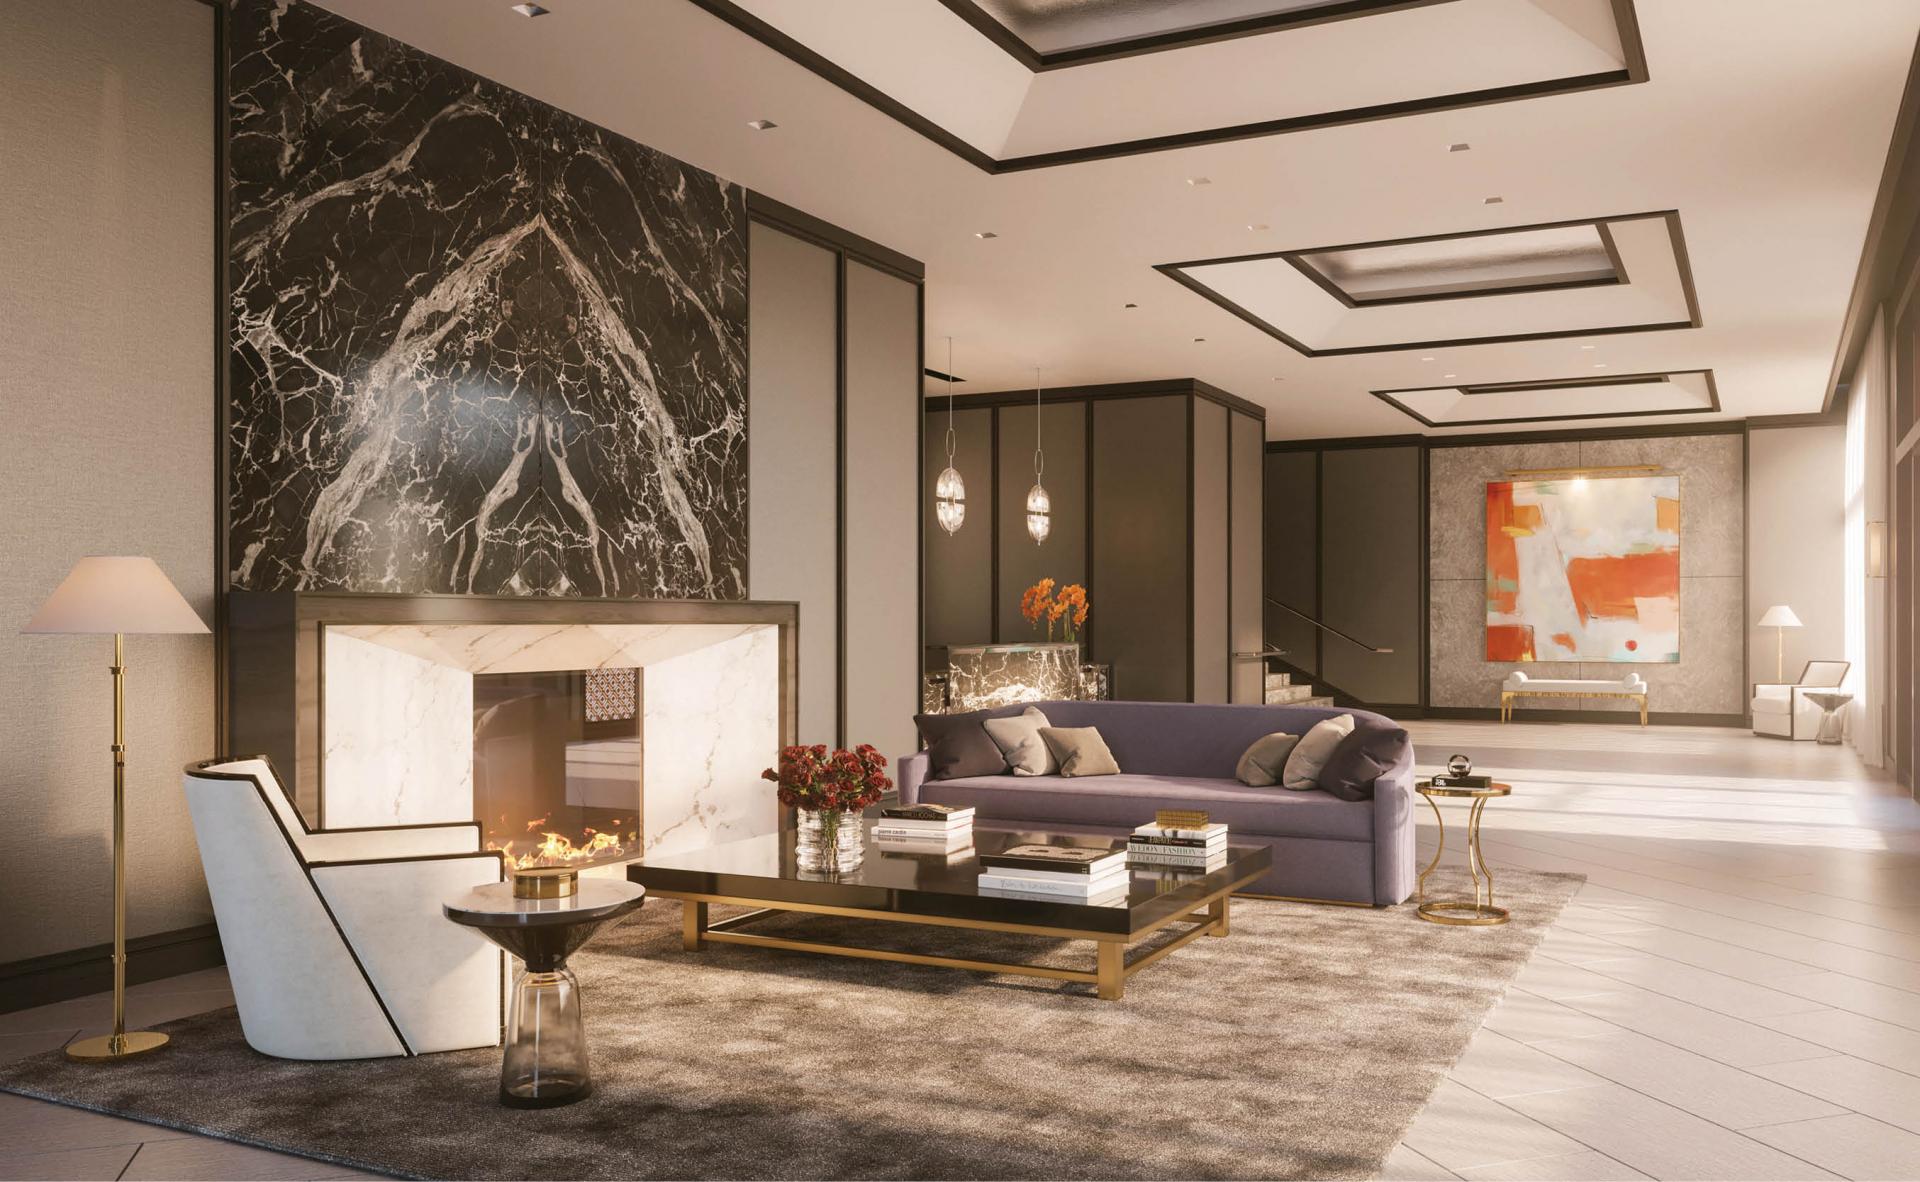 Experience Art and Culture Like Never Before at Four Seasons Private Residences